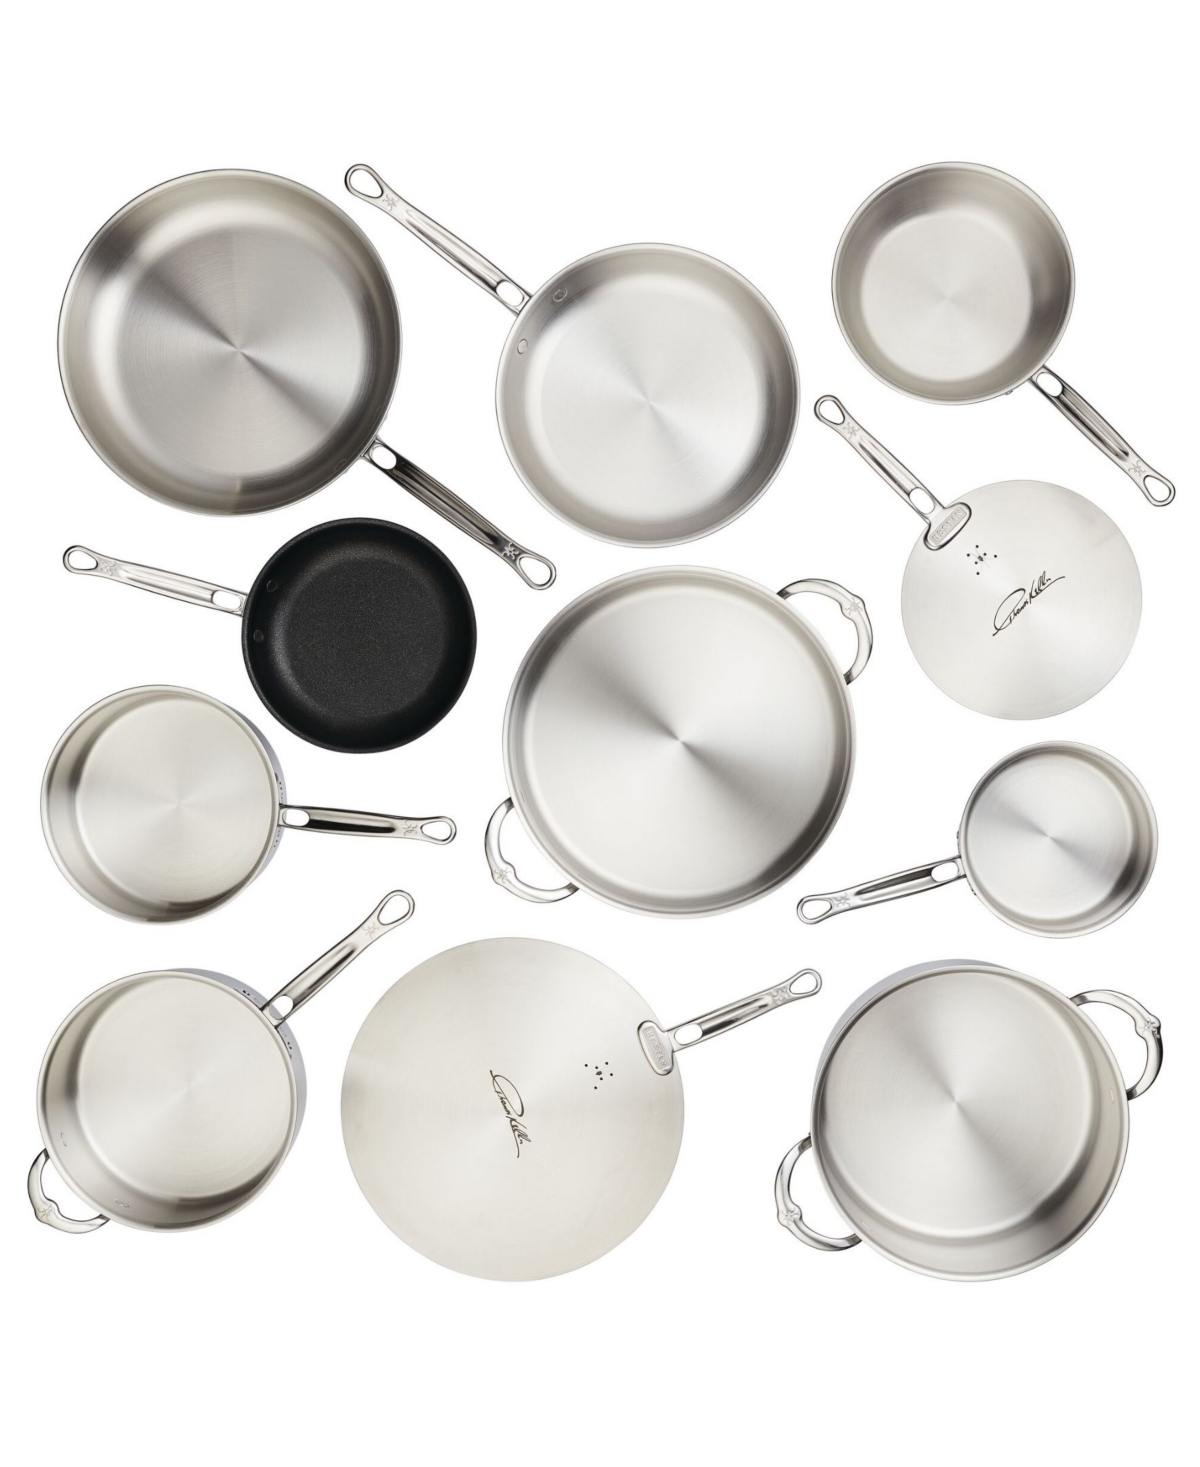 Shop Hestan Thomas Keller Insignia Commercial Clad Stainless Steel 11-piece Set In No Color